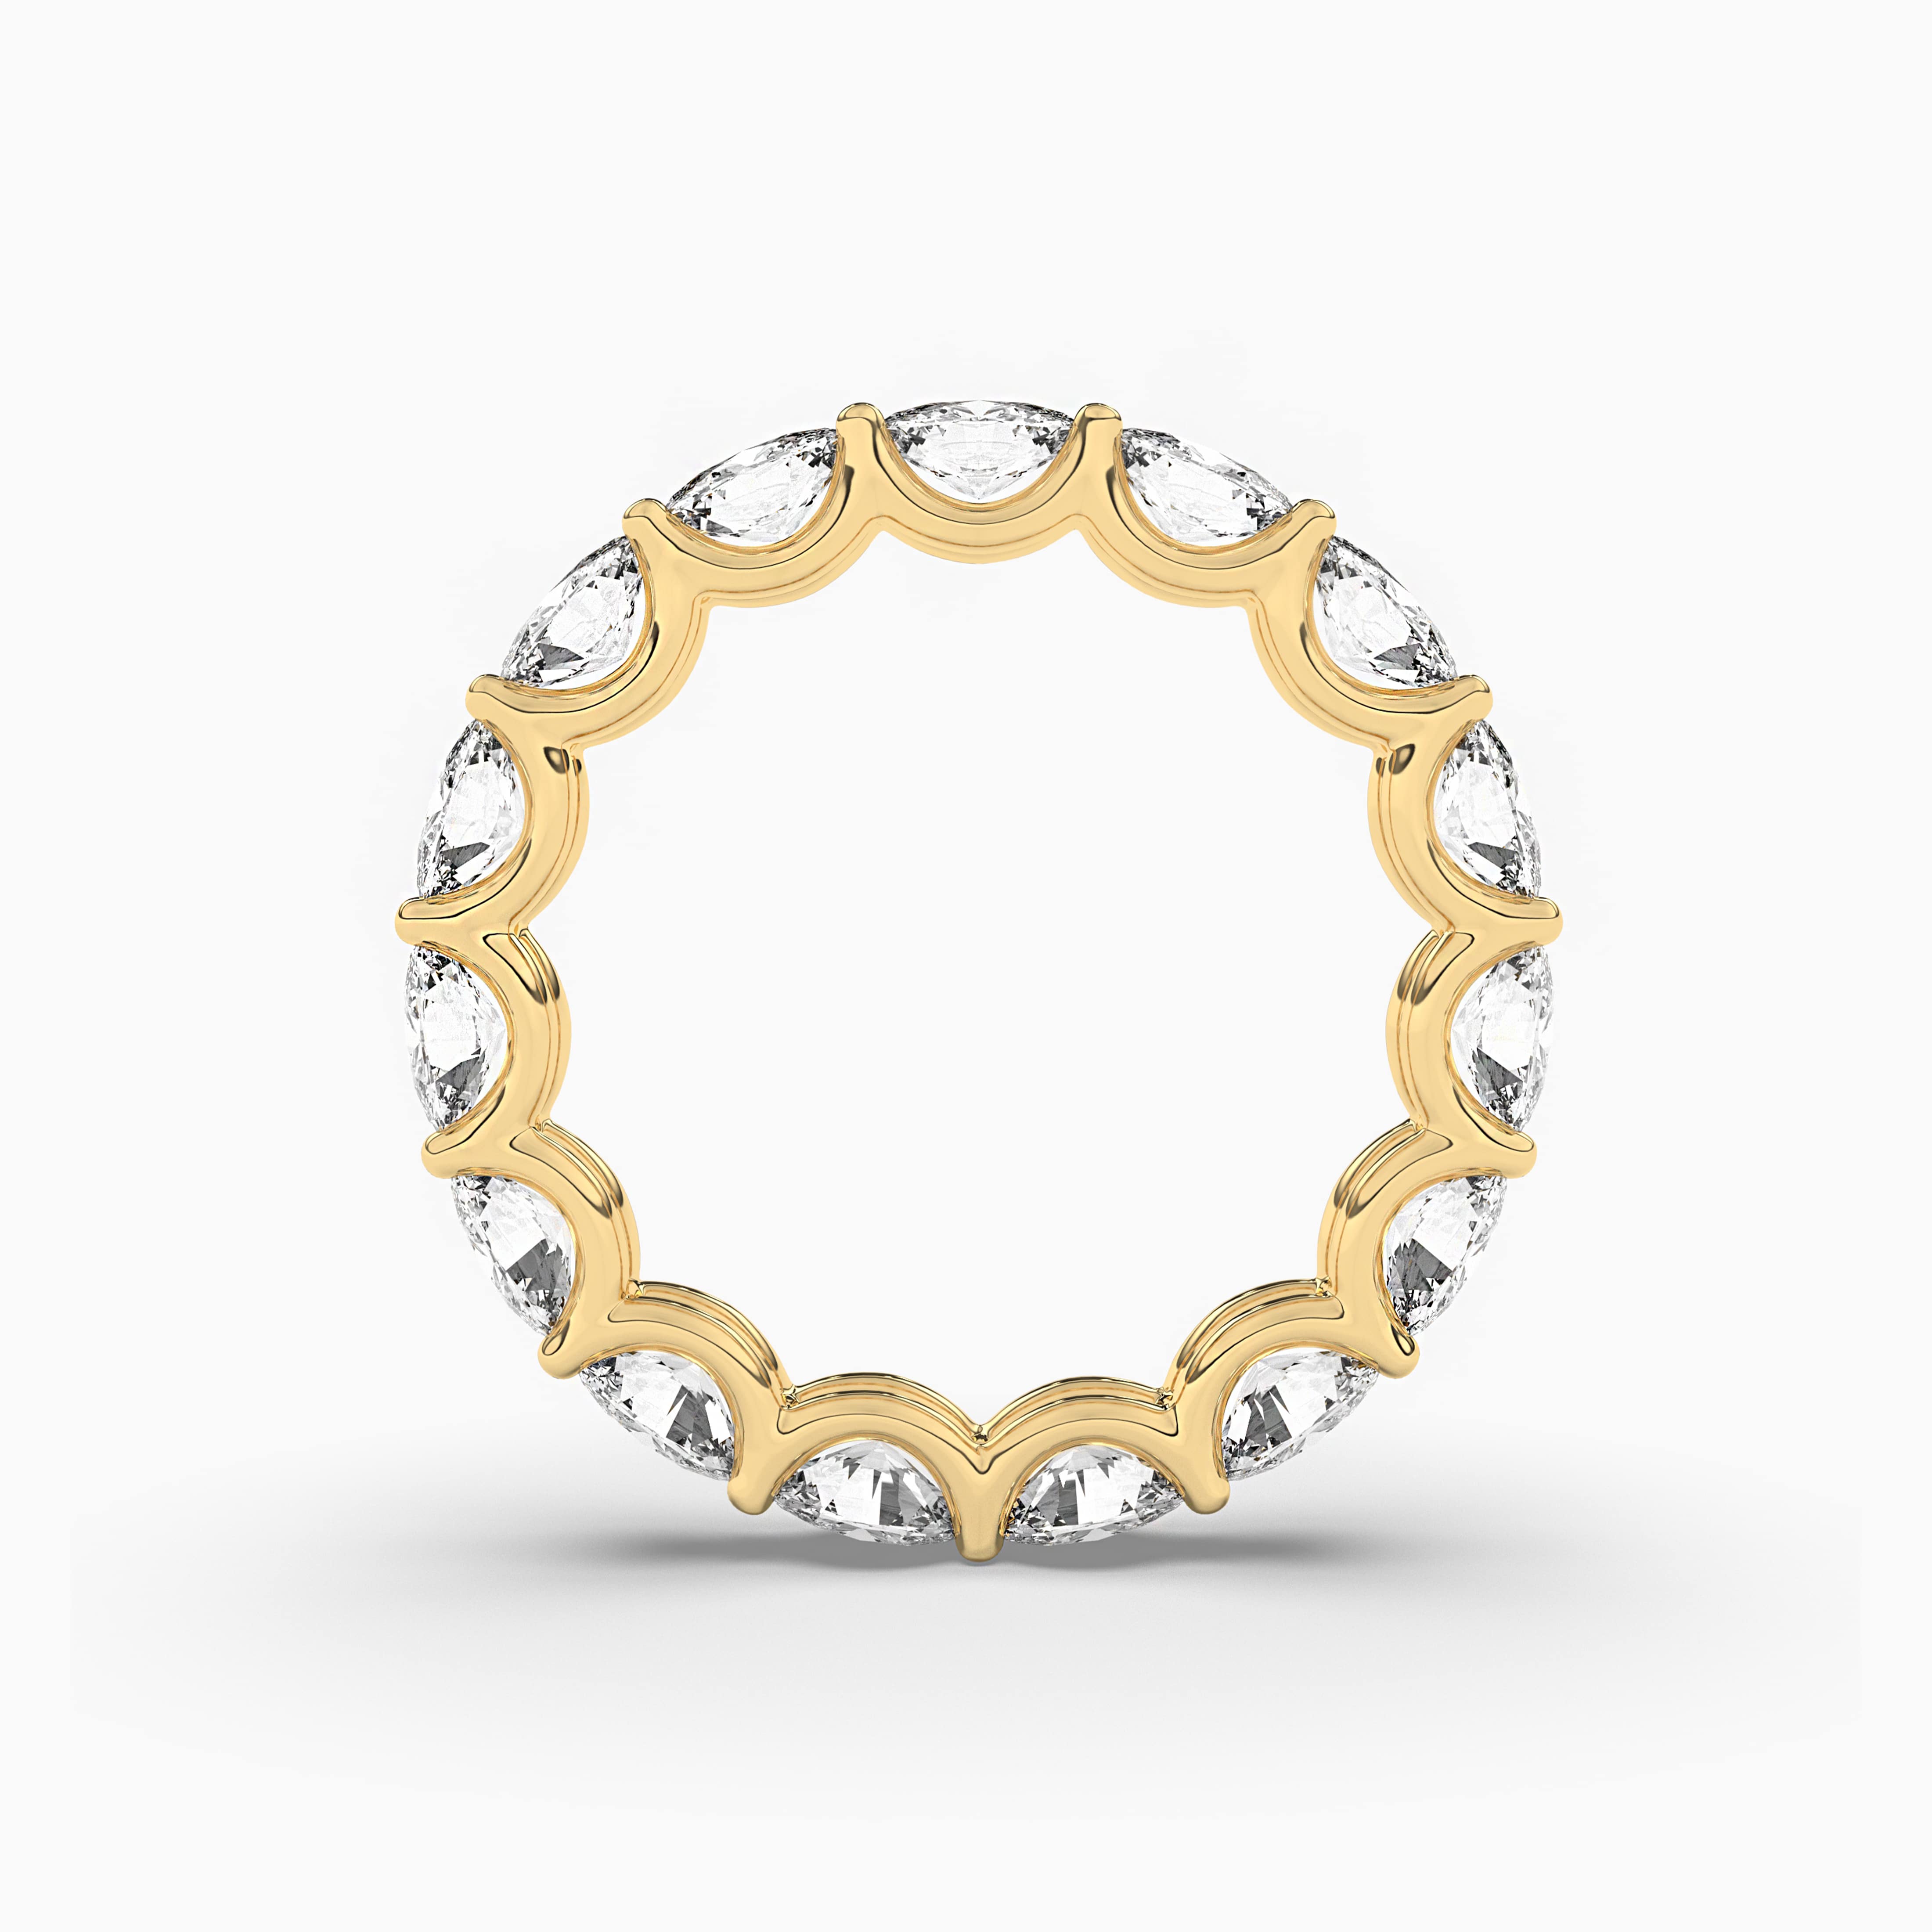 ROUND SHAPE MOISSANITE ETERNITY BAND IN YELLOW GOLD